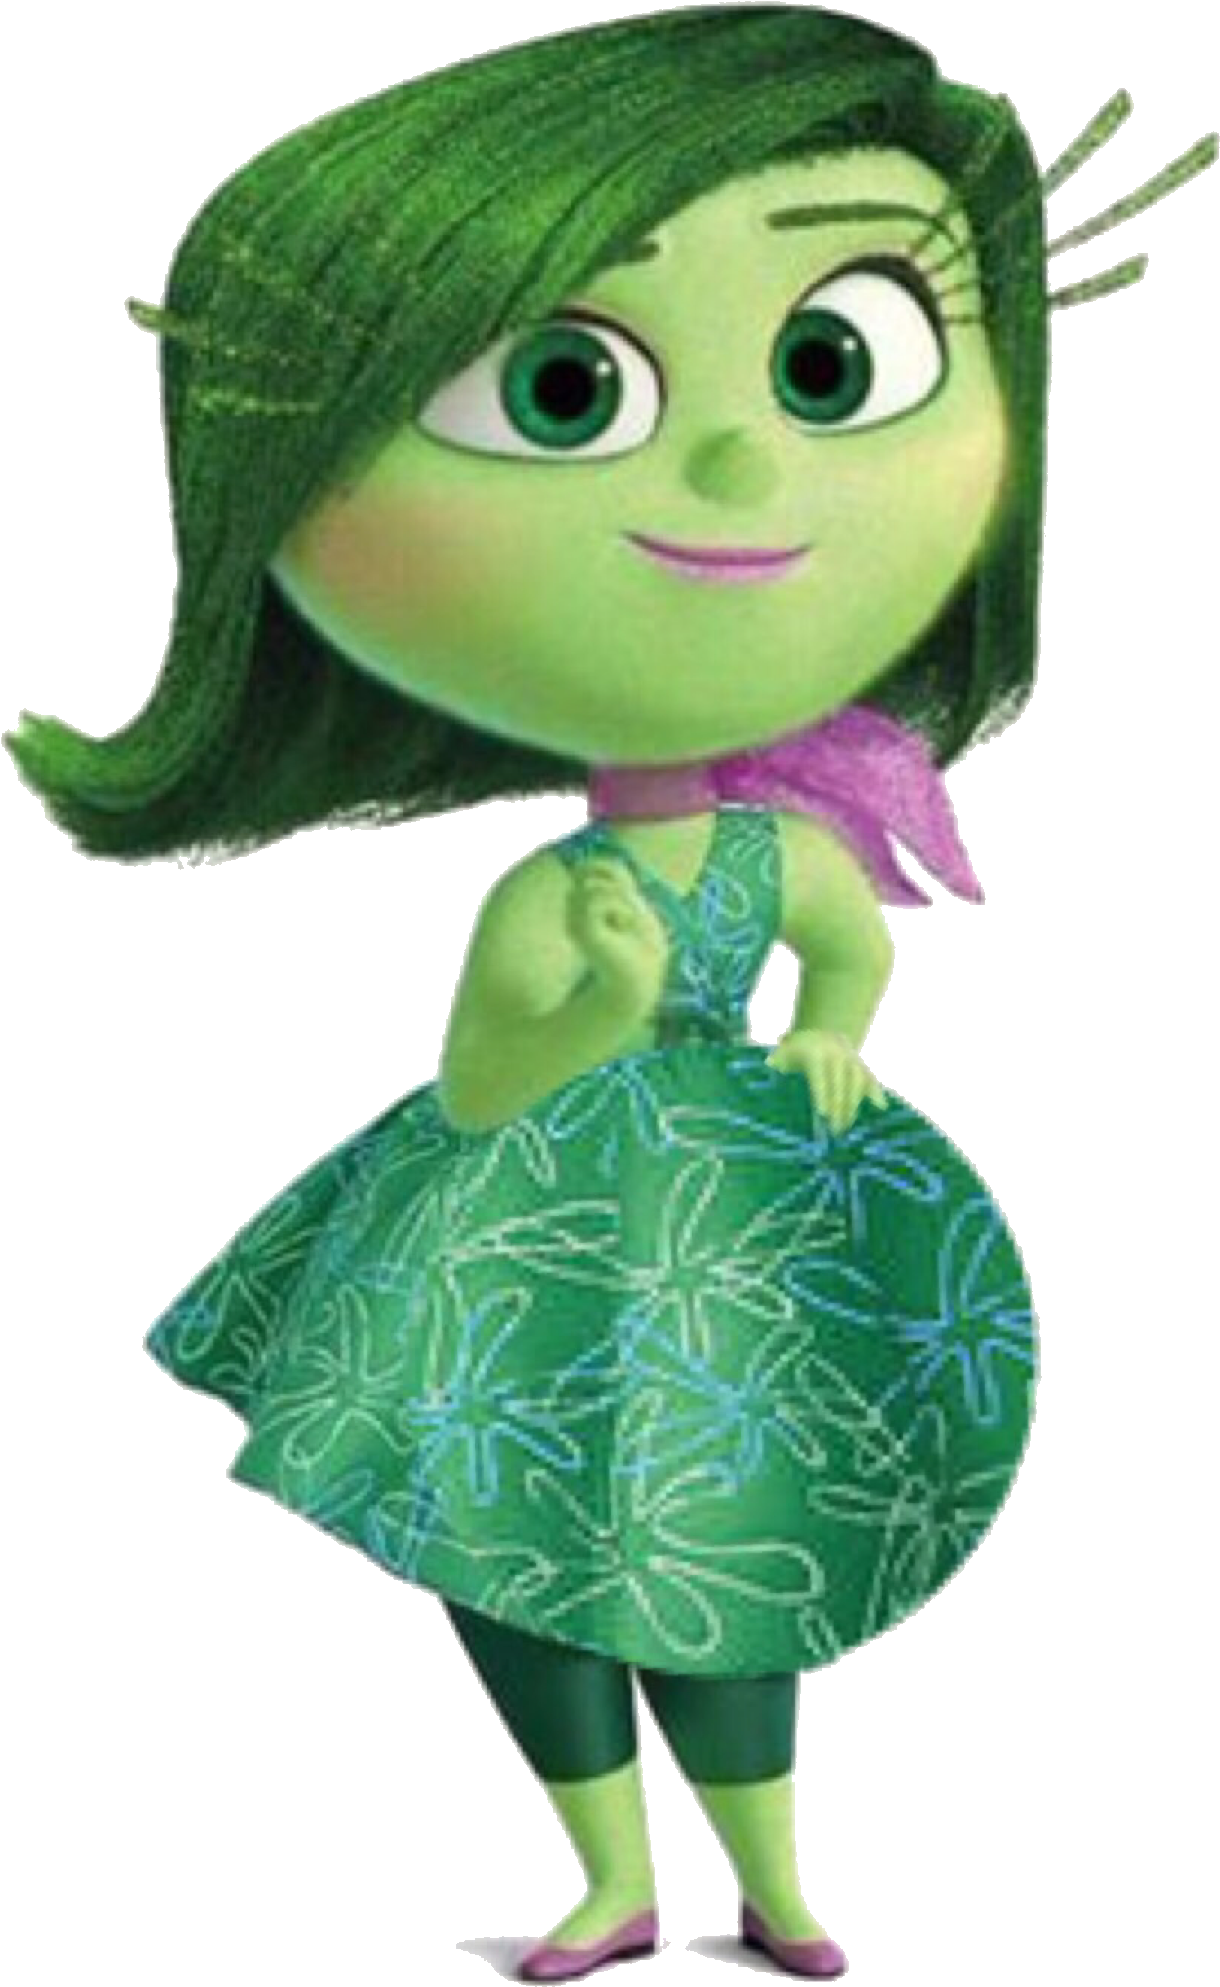 Pregnant Disgust - Disgust And Sadness Inside Out, Hd Png Download